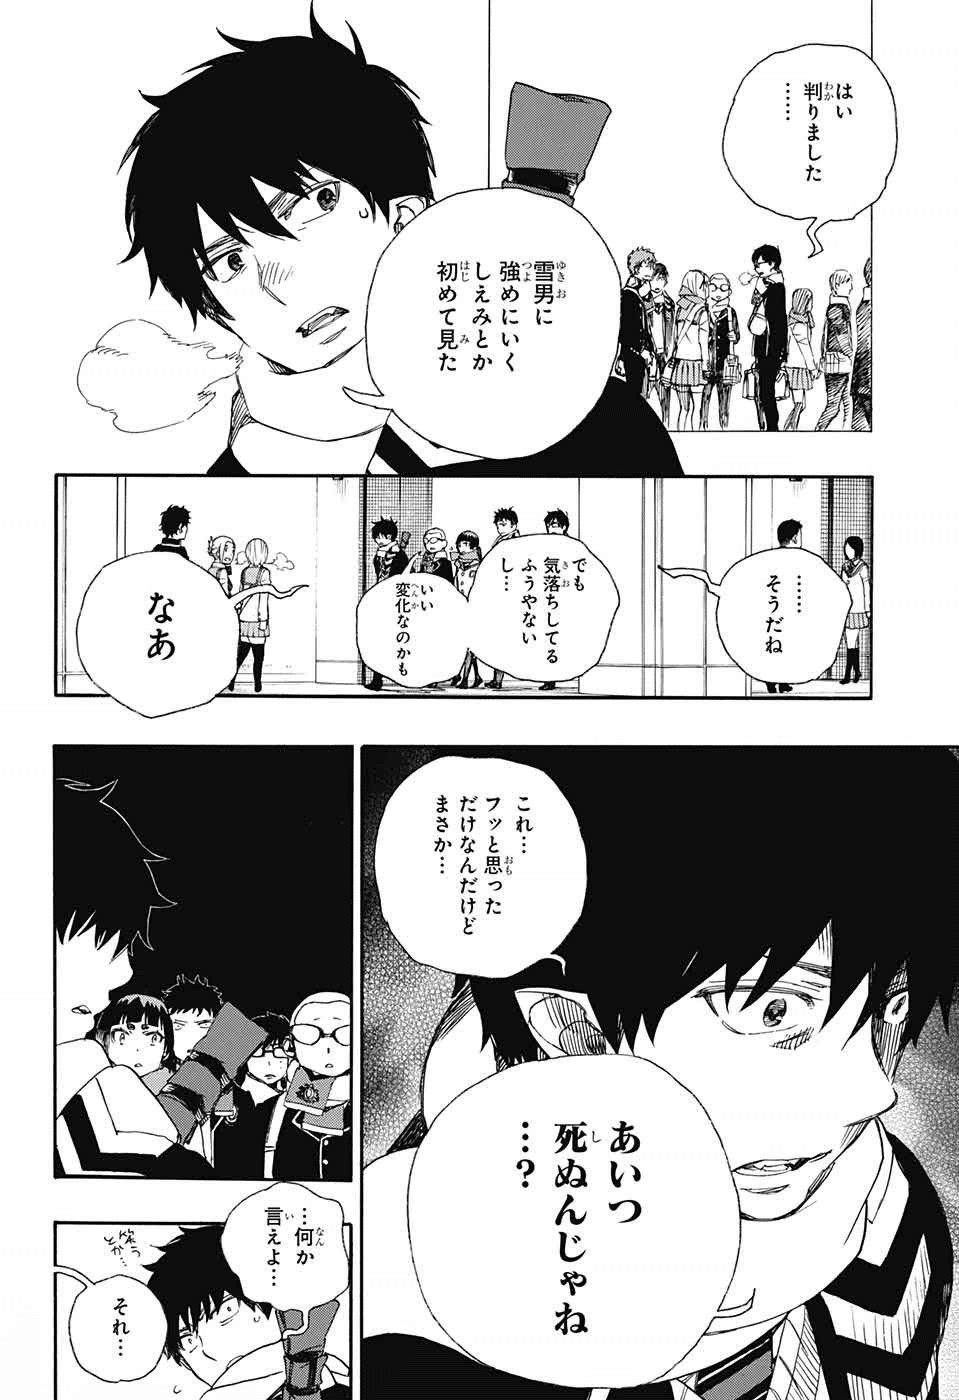 Ao no Exorcist - Chapter 88 - Page 4